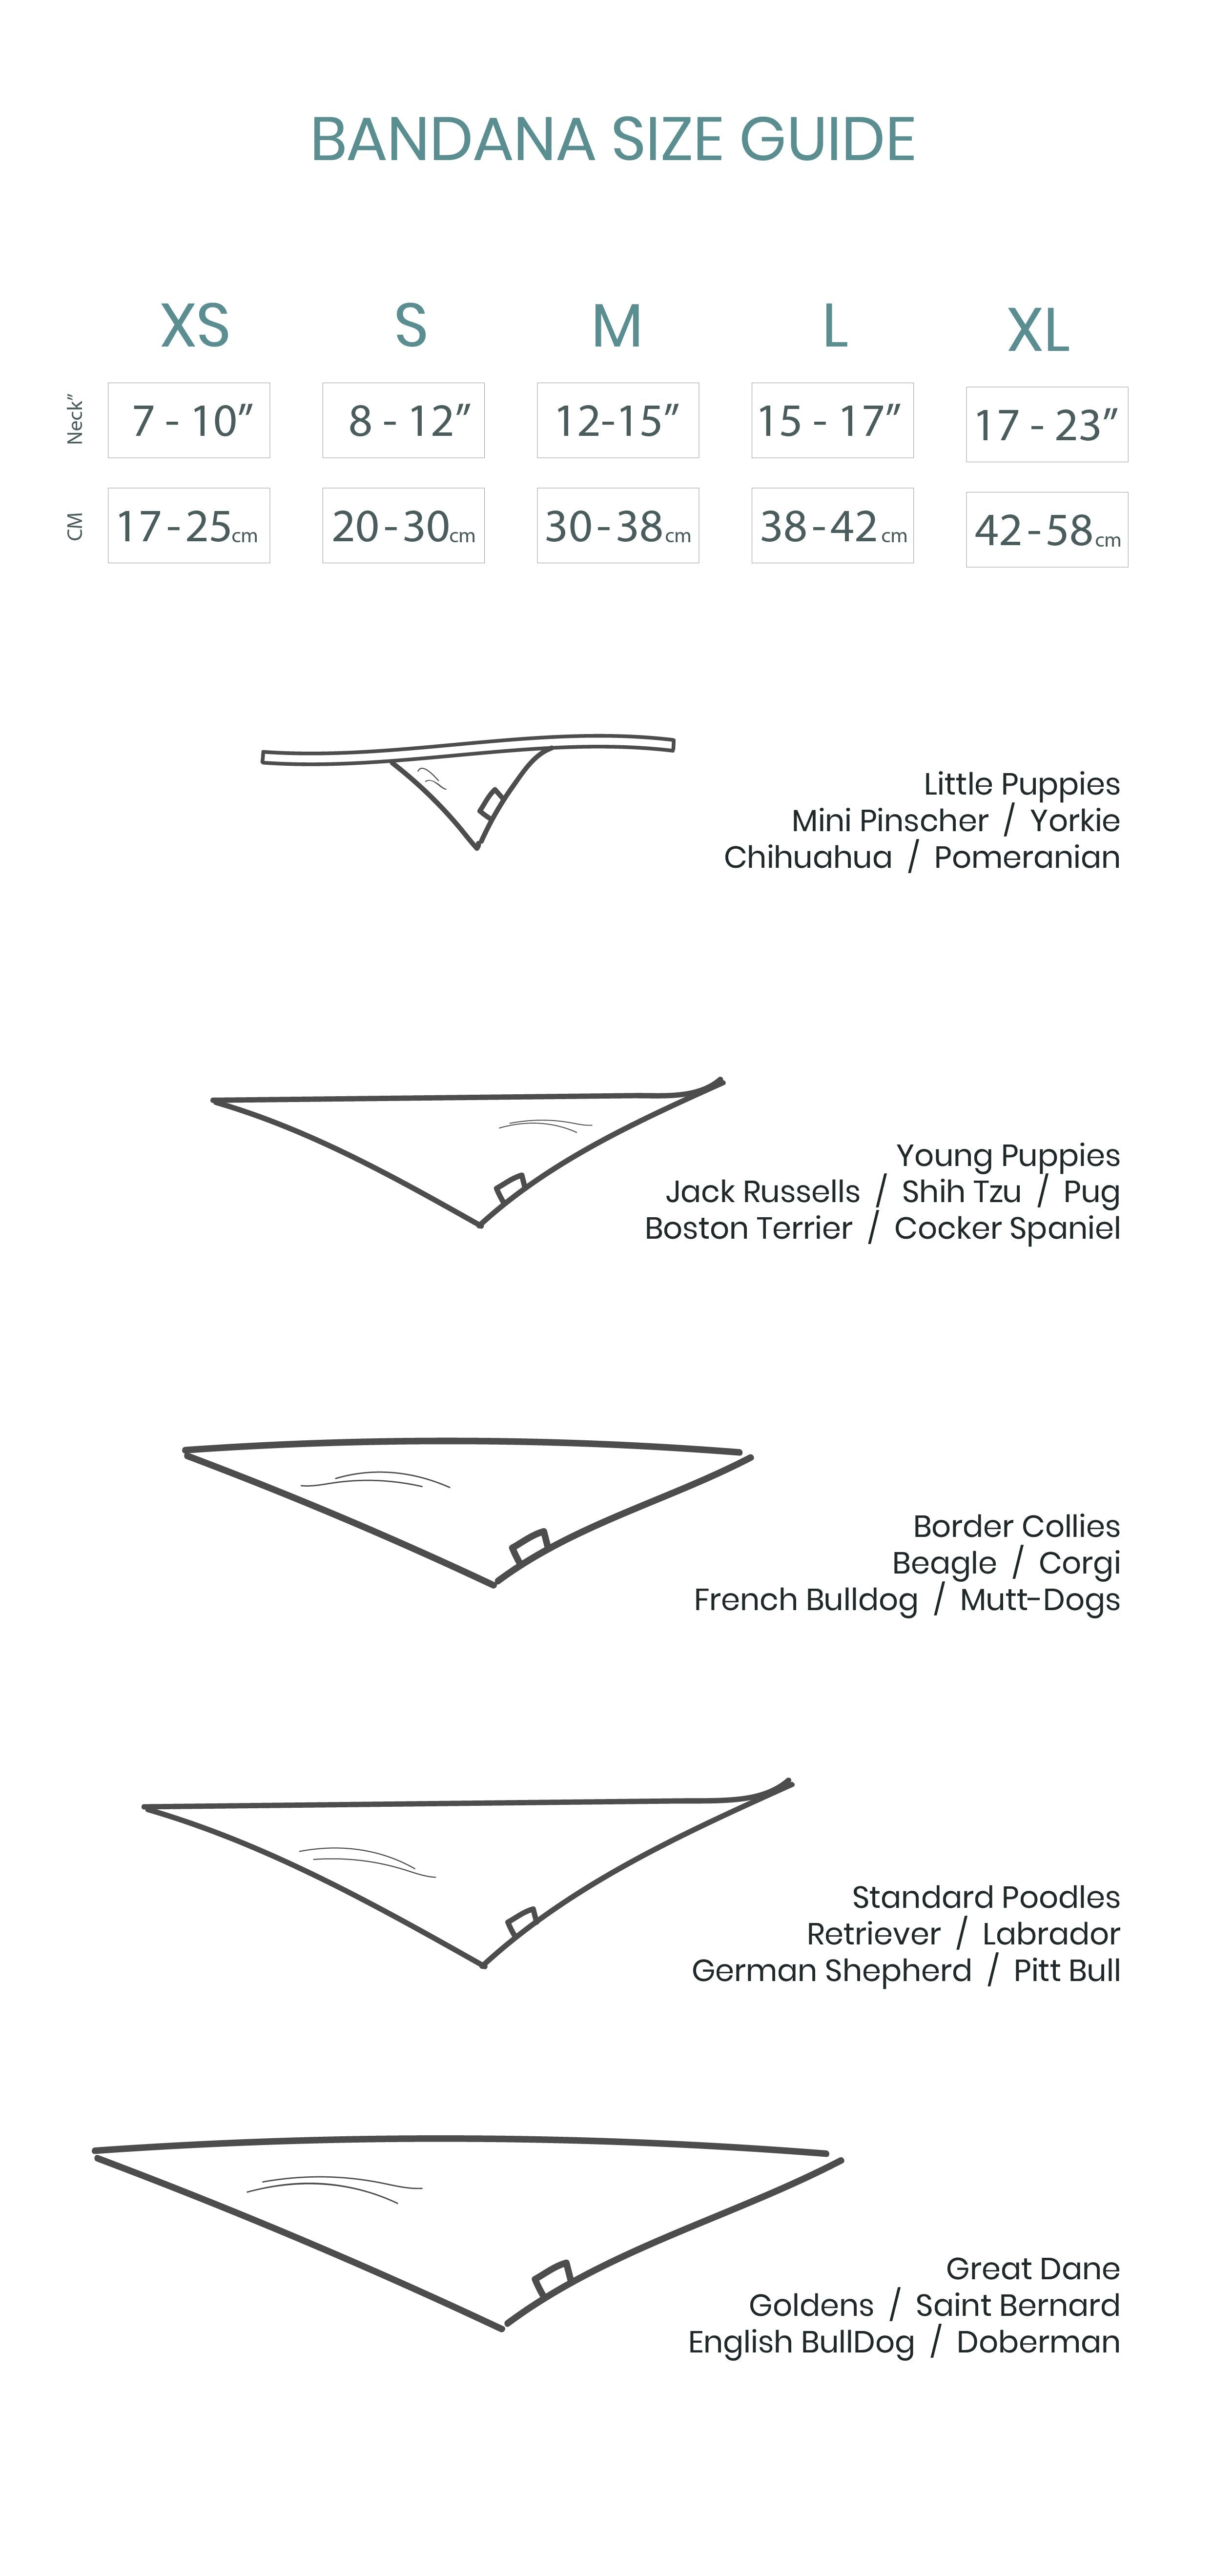 The Paws Bandana Size Guide